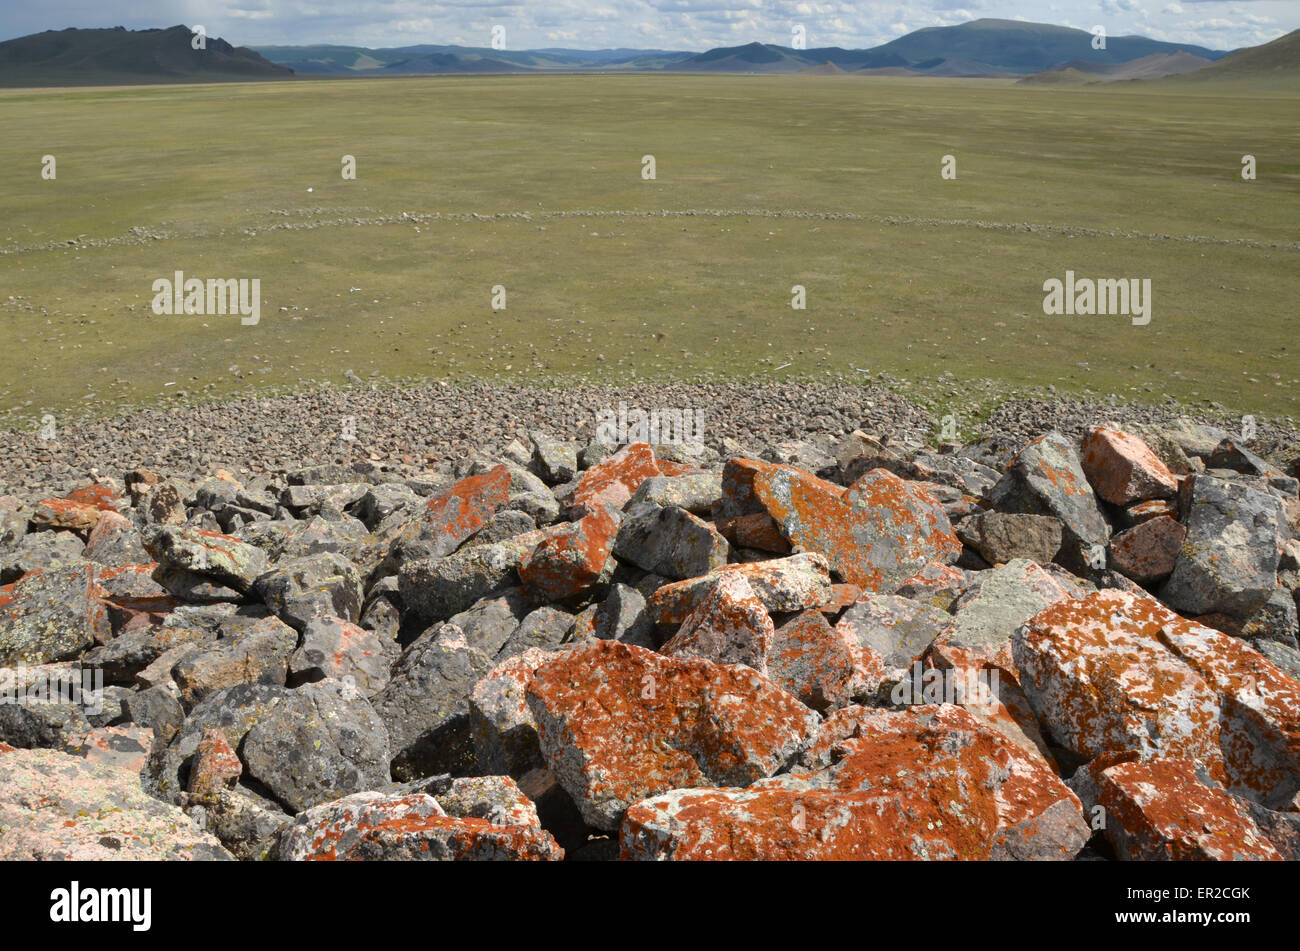 View from the top of a burial mound in the Arhangay province, central Mongolia. A stone circle around the monument is visible. Stock Photo